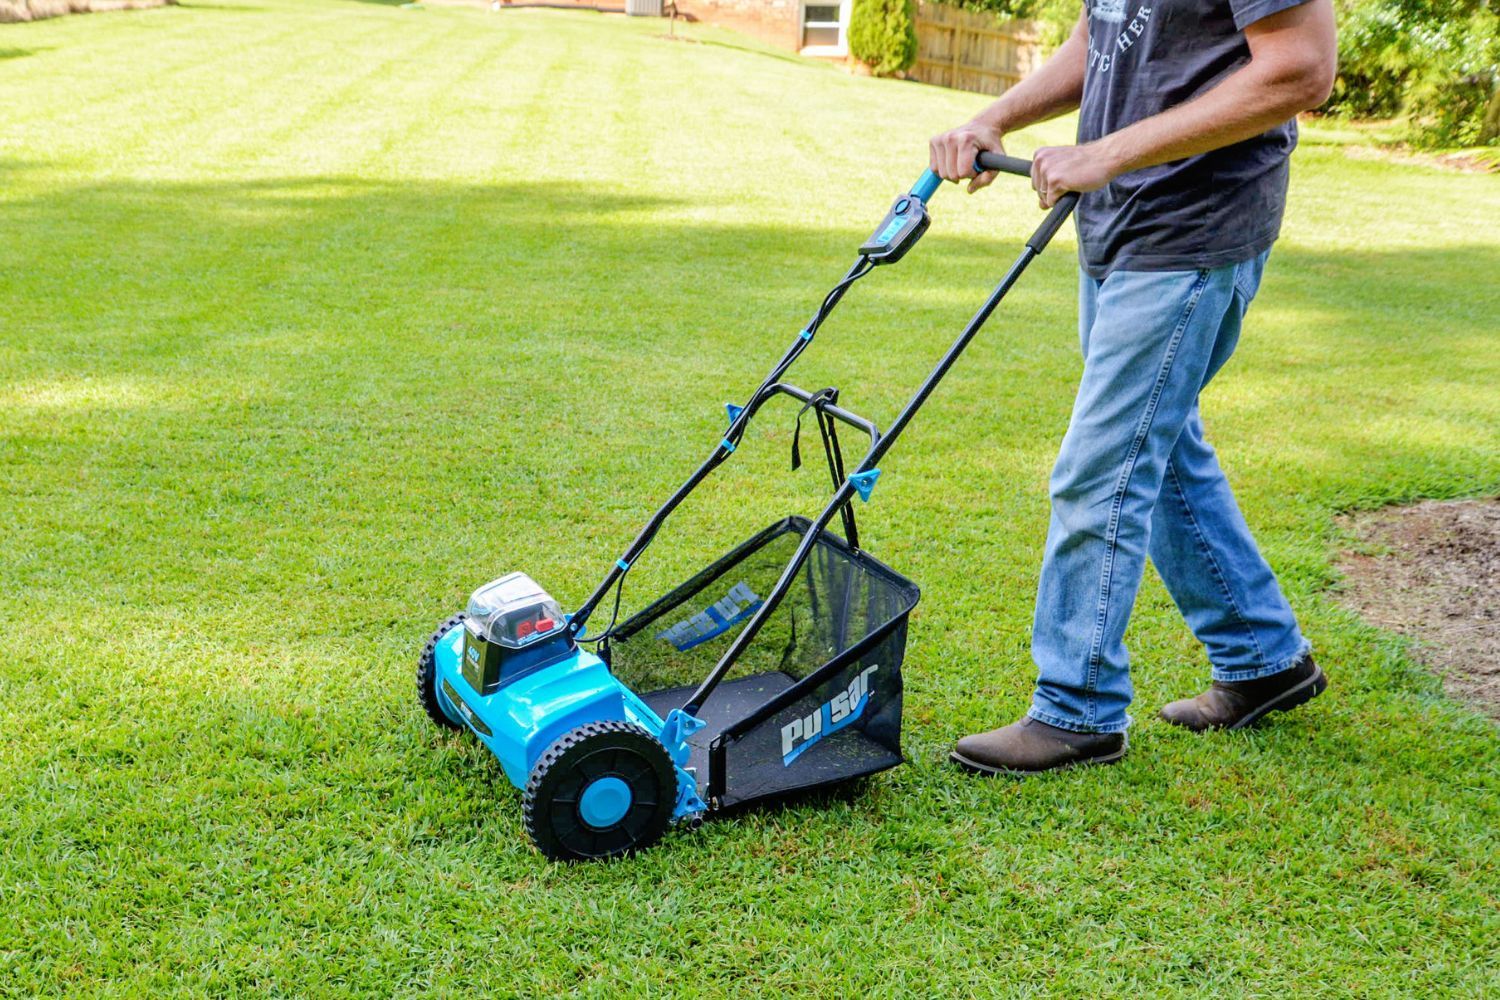 What should I look for in a used reel mower? : r/lawnmowers